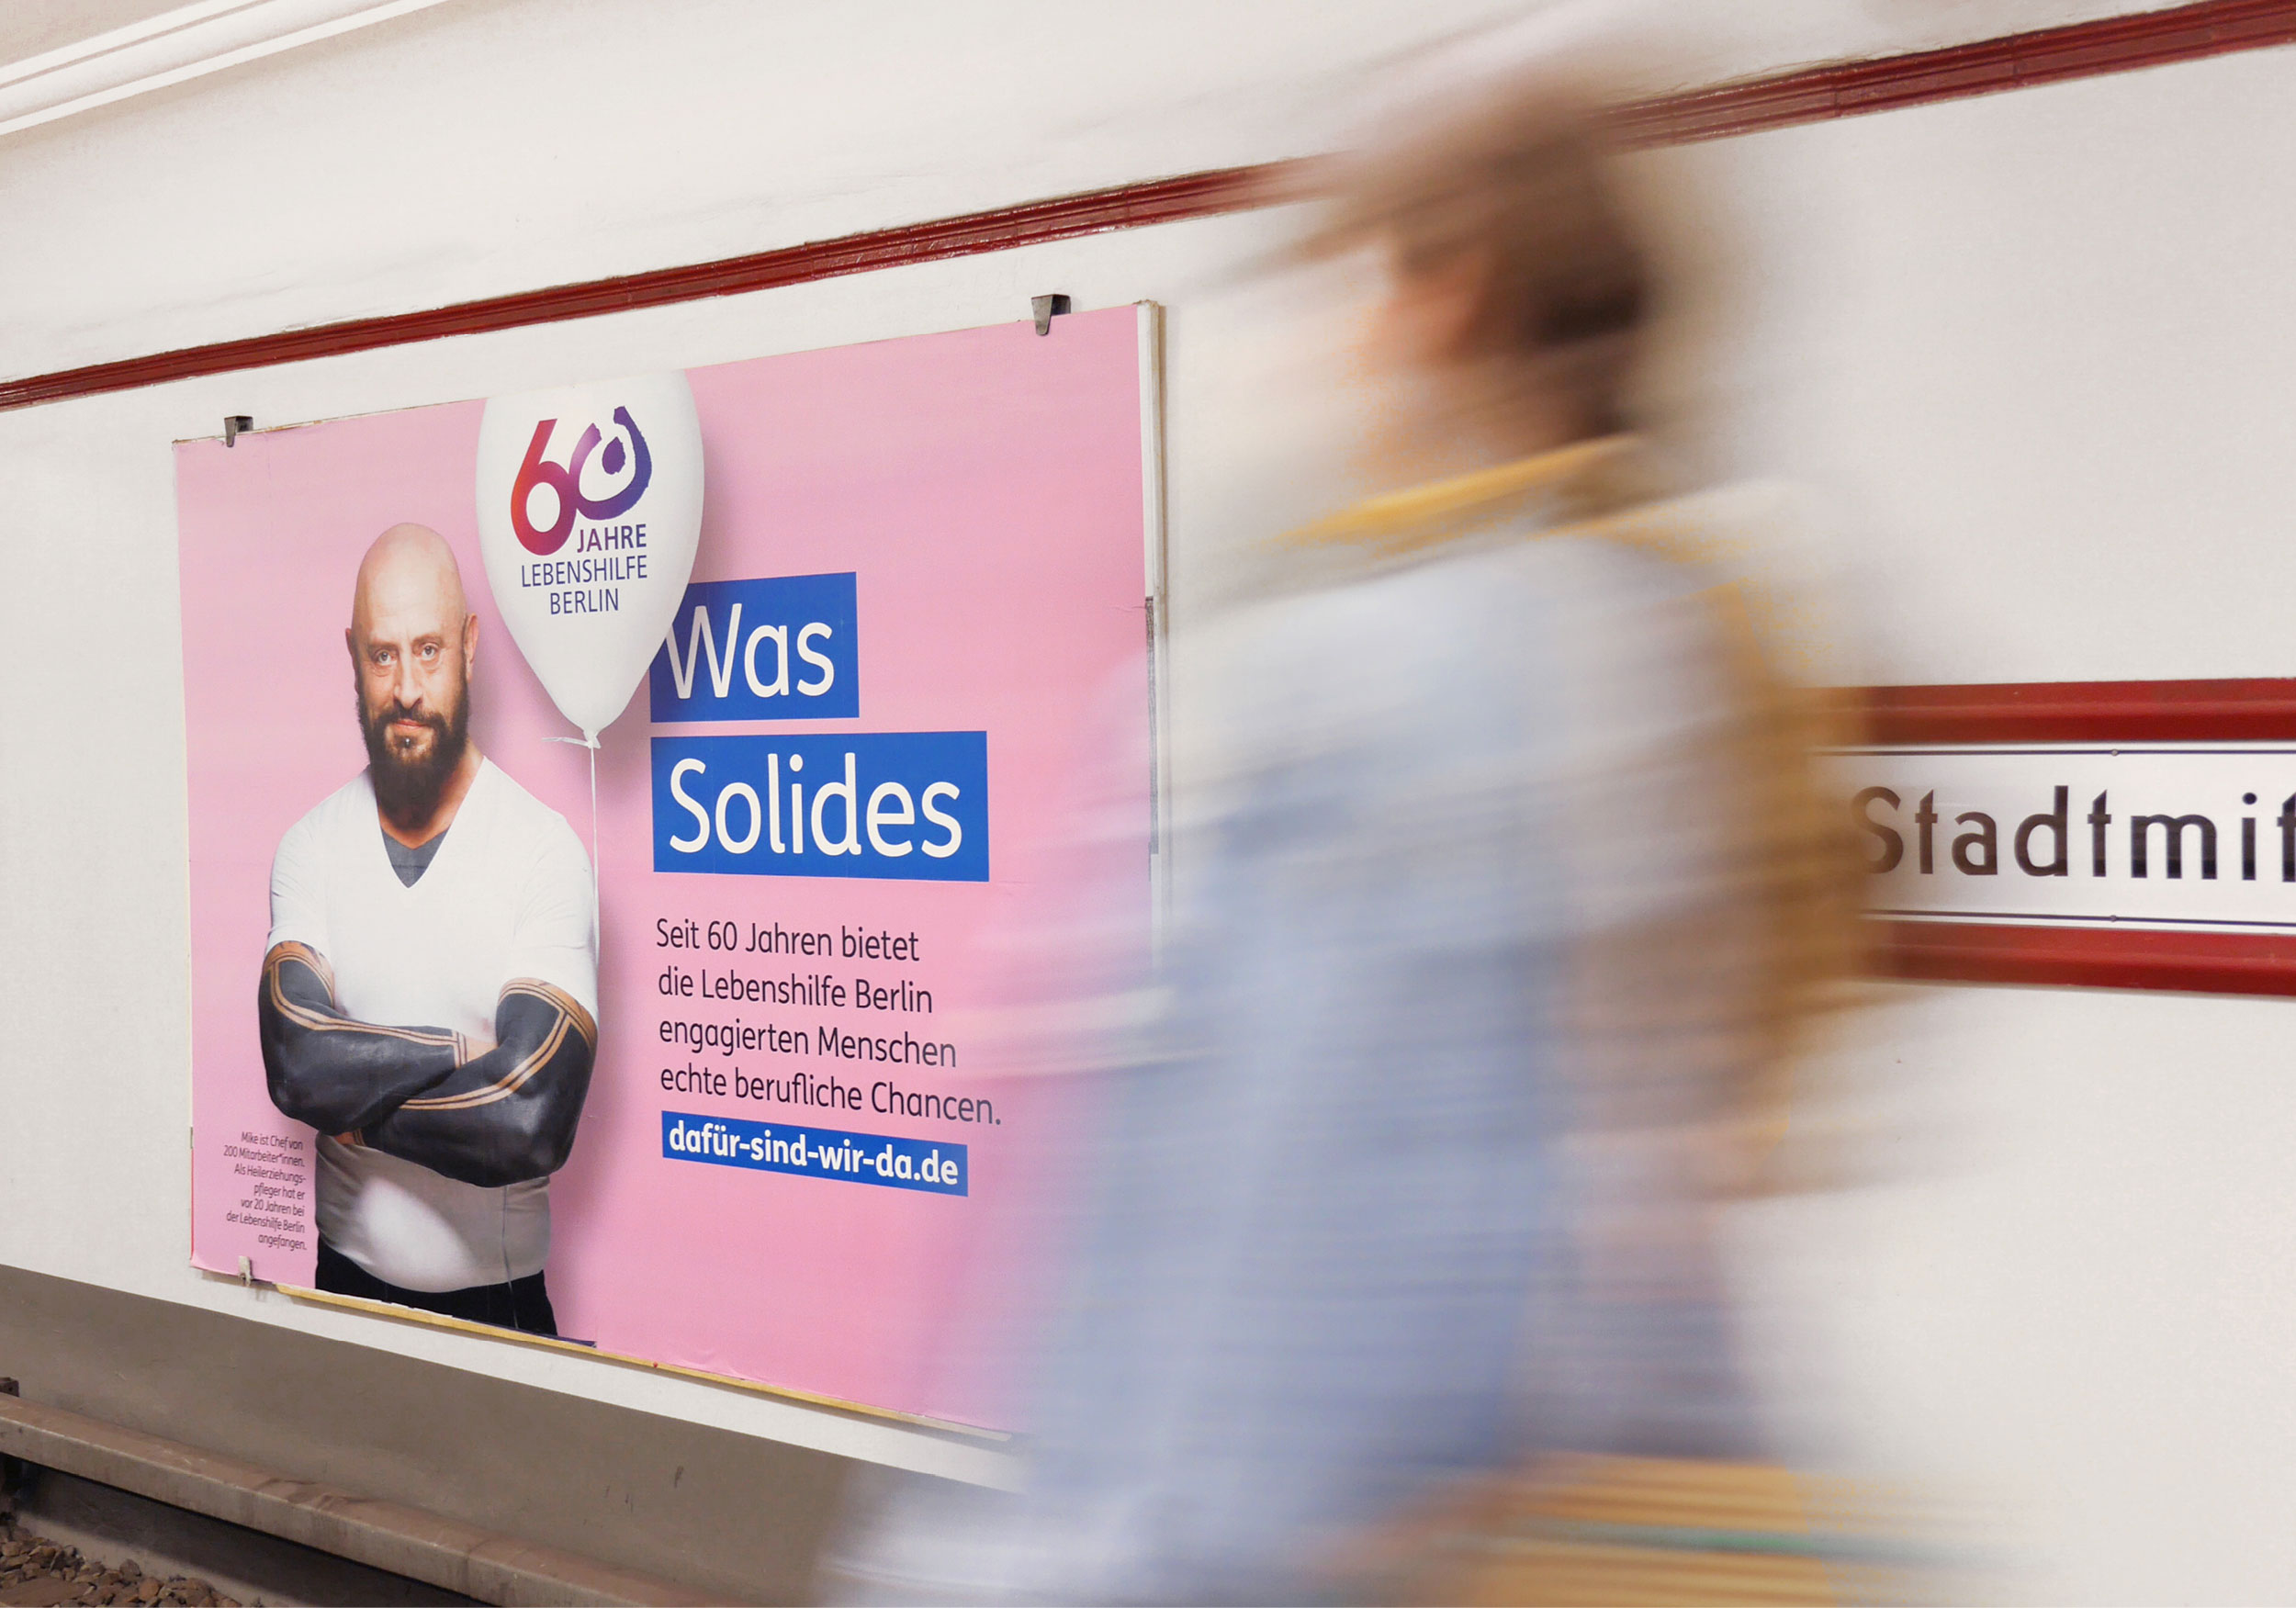 Photo of the poster motif "something solid" in the Stadtmitte underground station